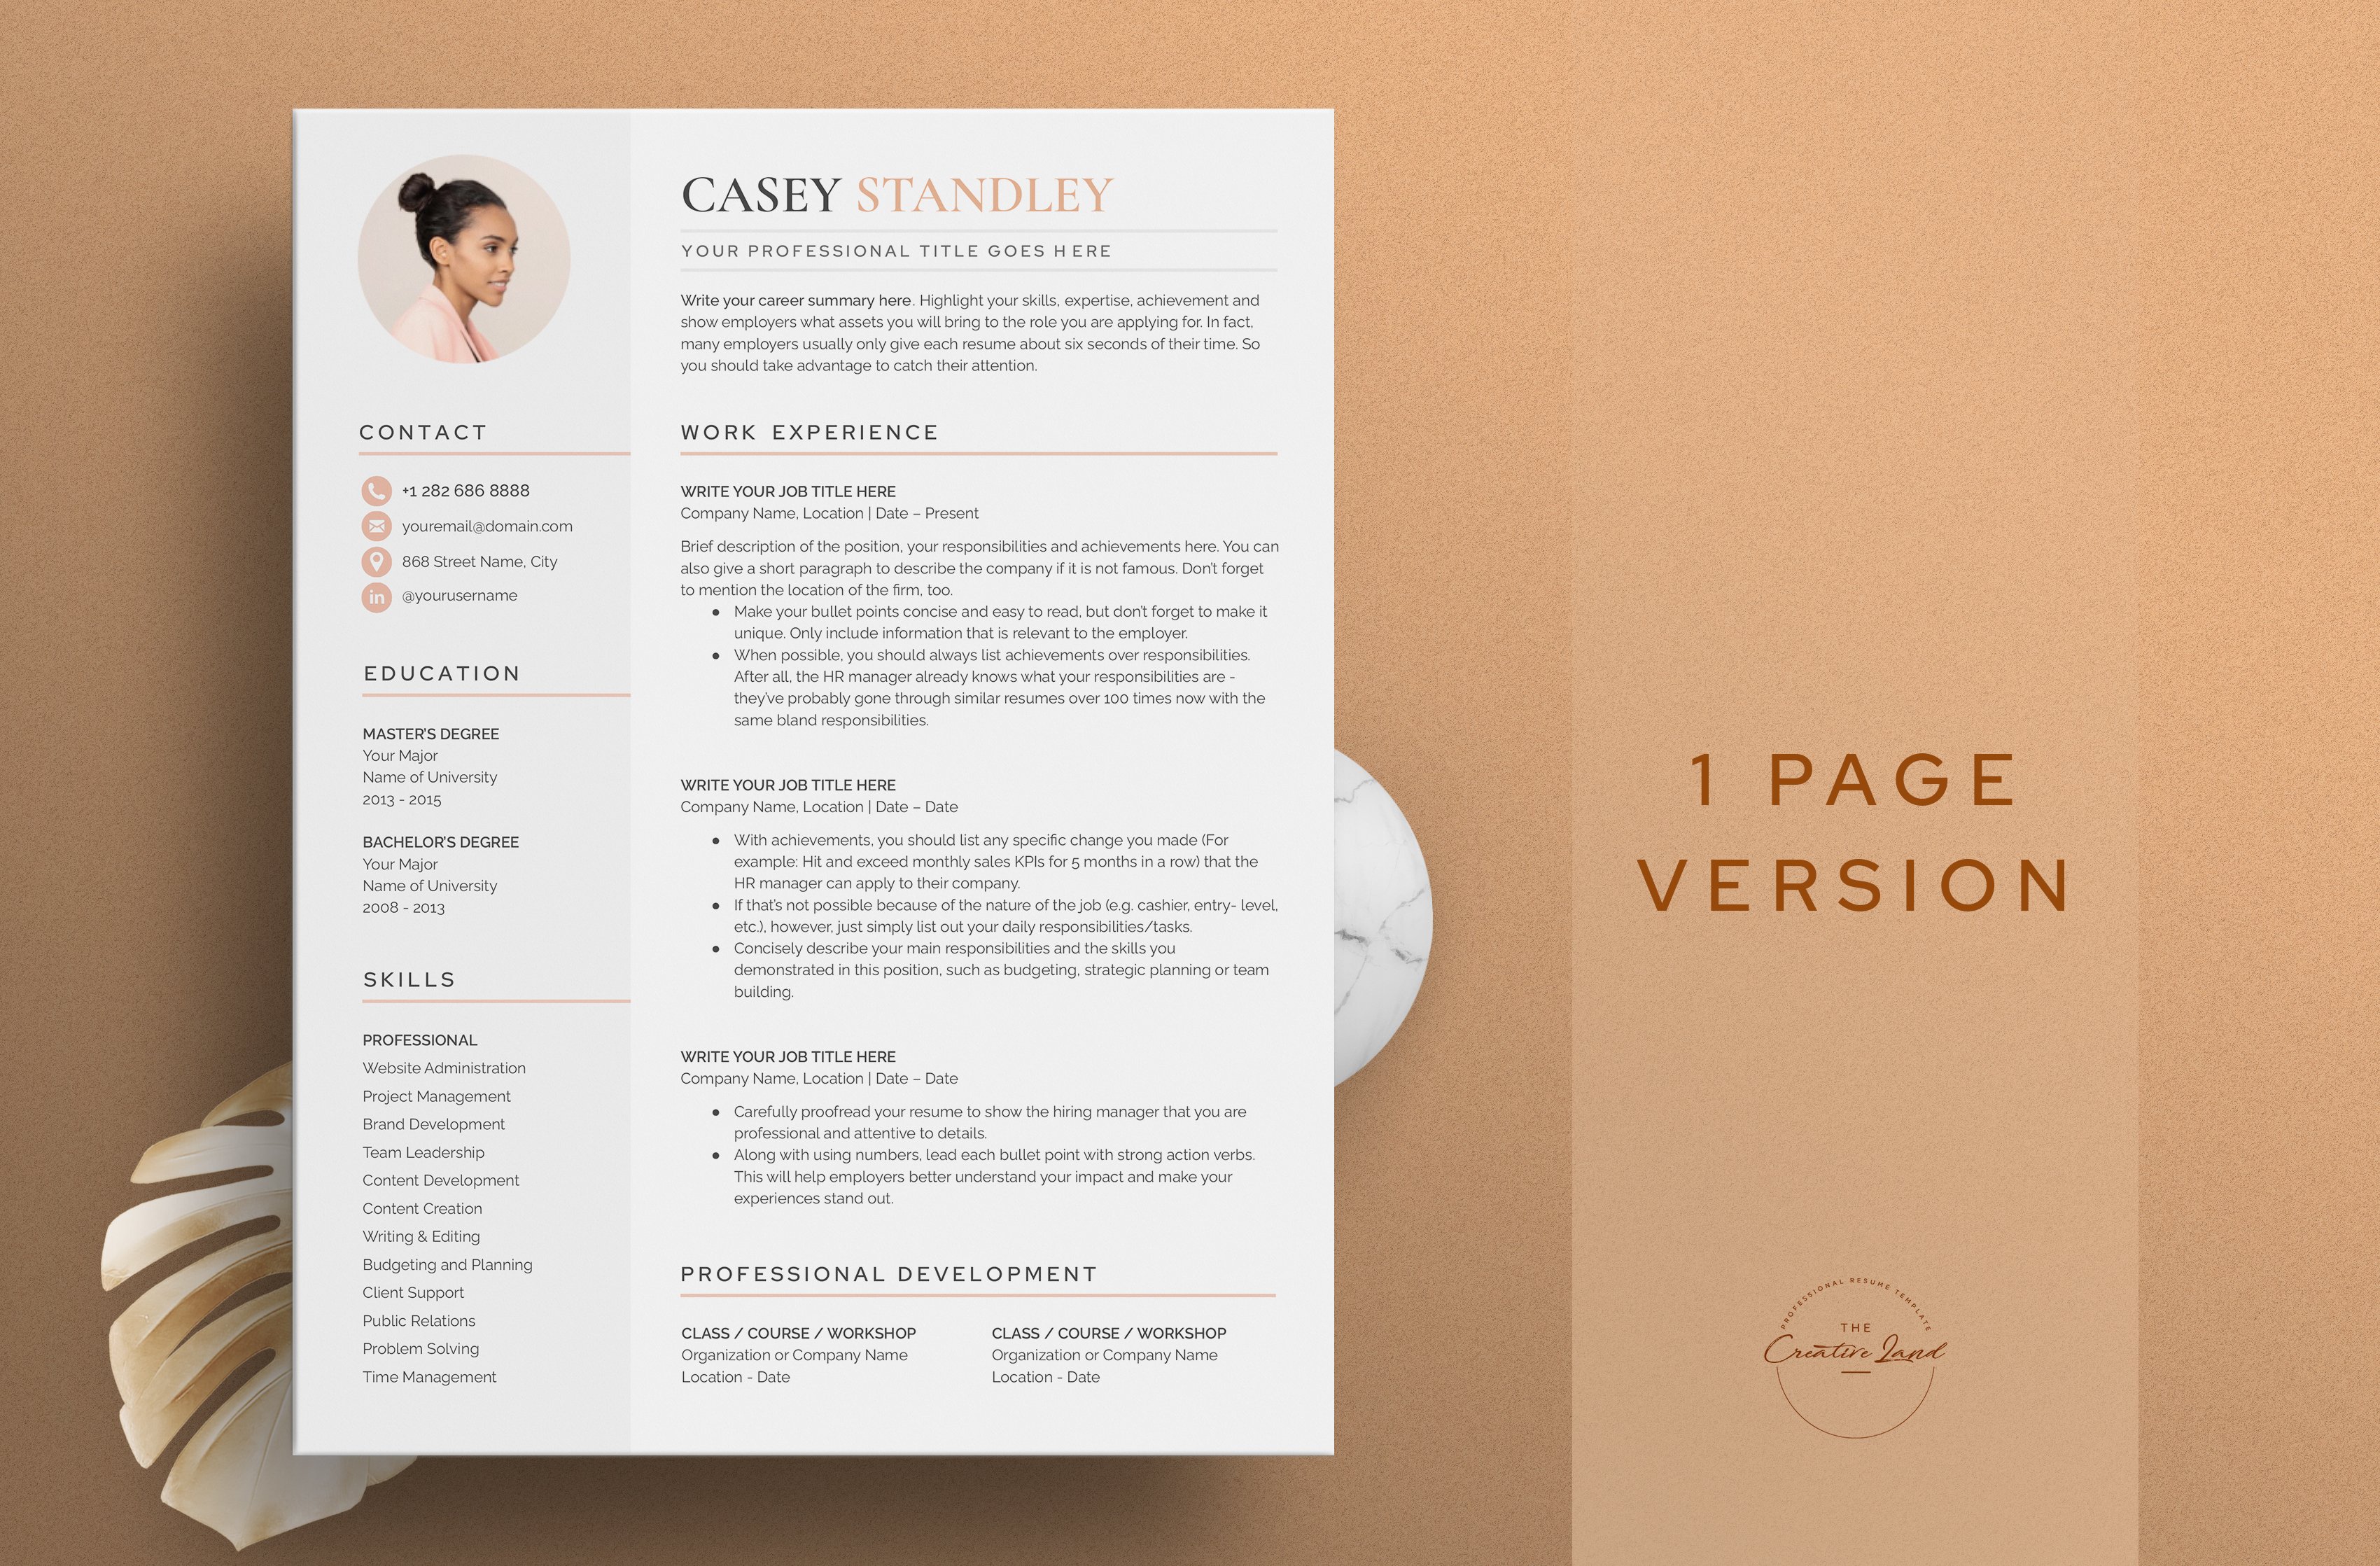 Resume/CV - The Standley preview image.